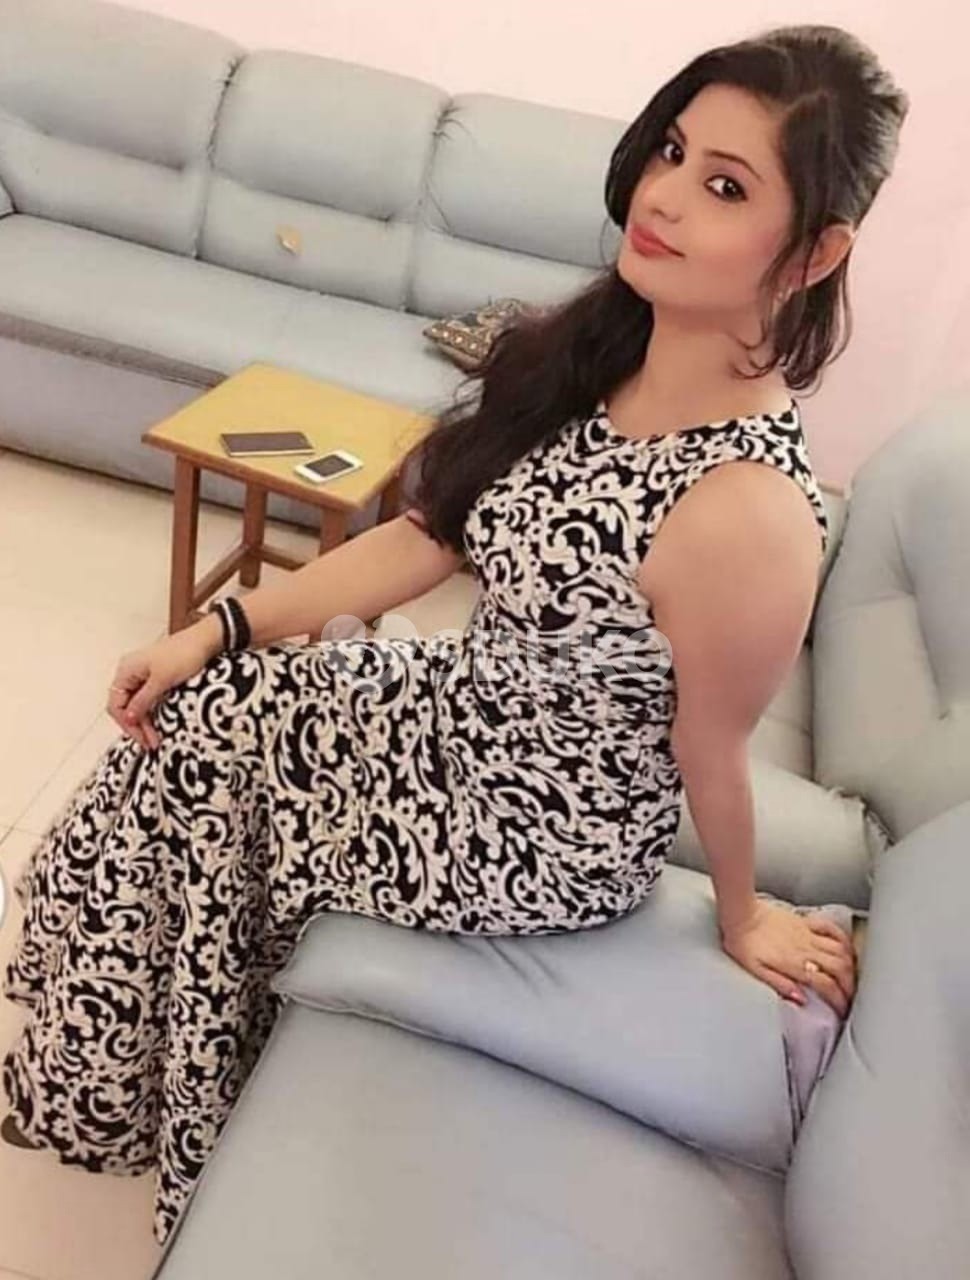 BESANT NAGAR TOP 🙋‍♀️TODAY LOW COST HIGH PROFILE INDEPENDENT CALL GIRL SERVICE AVAILABLE 24 HOURS AVAILABLE HOM